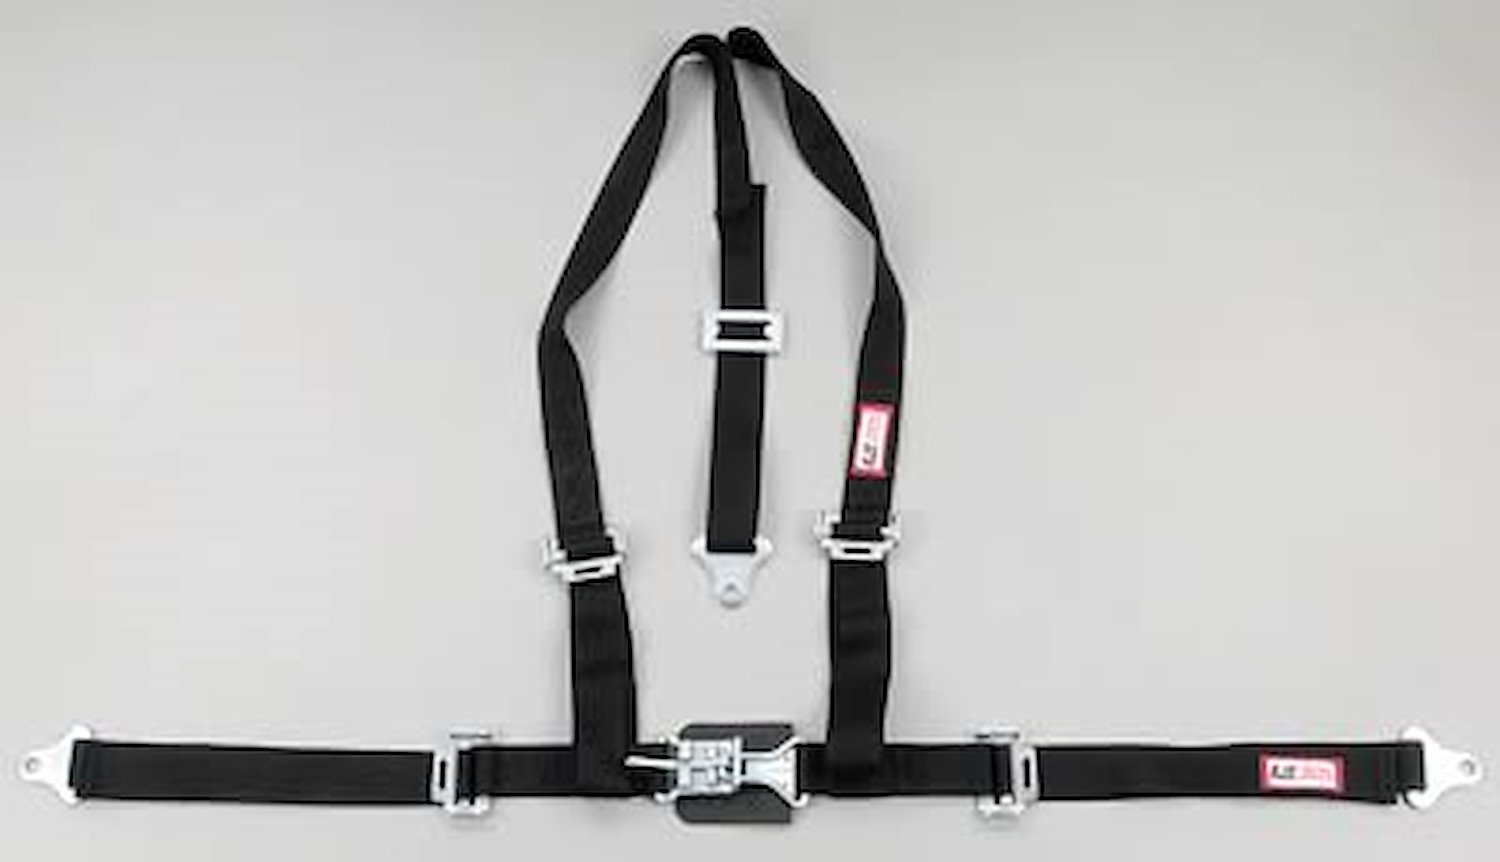 NON-SFI L&L HARNESS 2 PULL UP Lap Belt SEWN IN 2 S.H. V ROLL BAR Mount w/STERNUM STRAP ALL SNAP ENDS RED